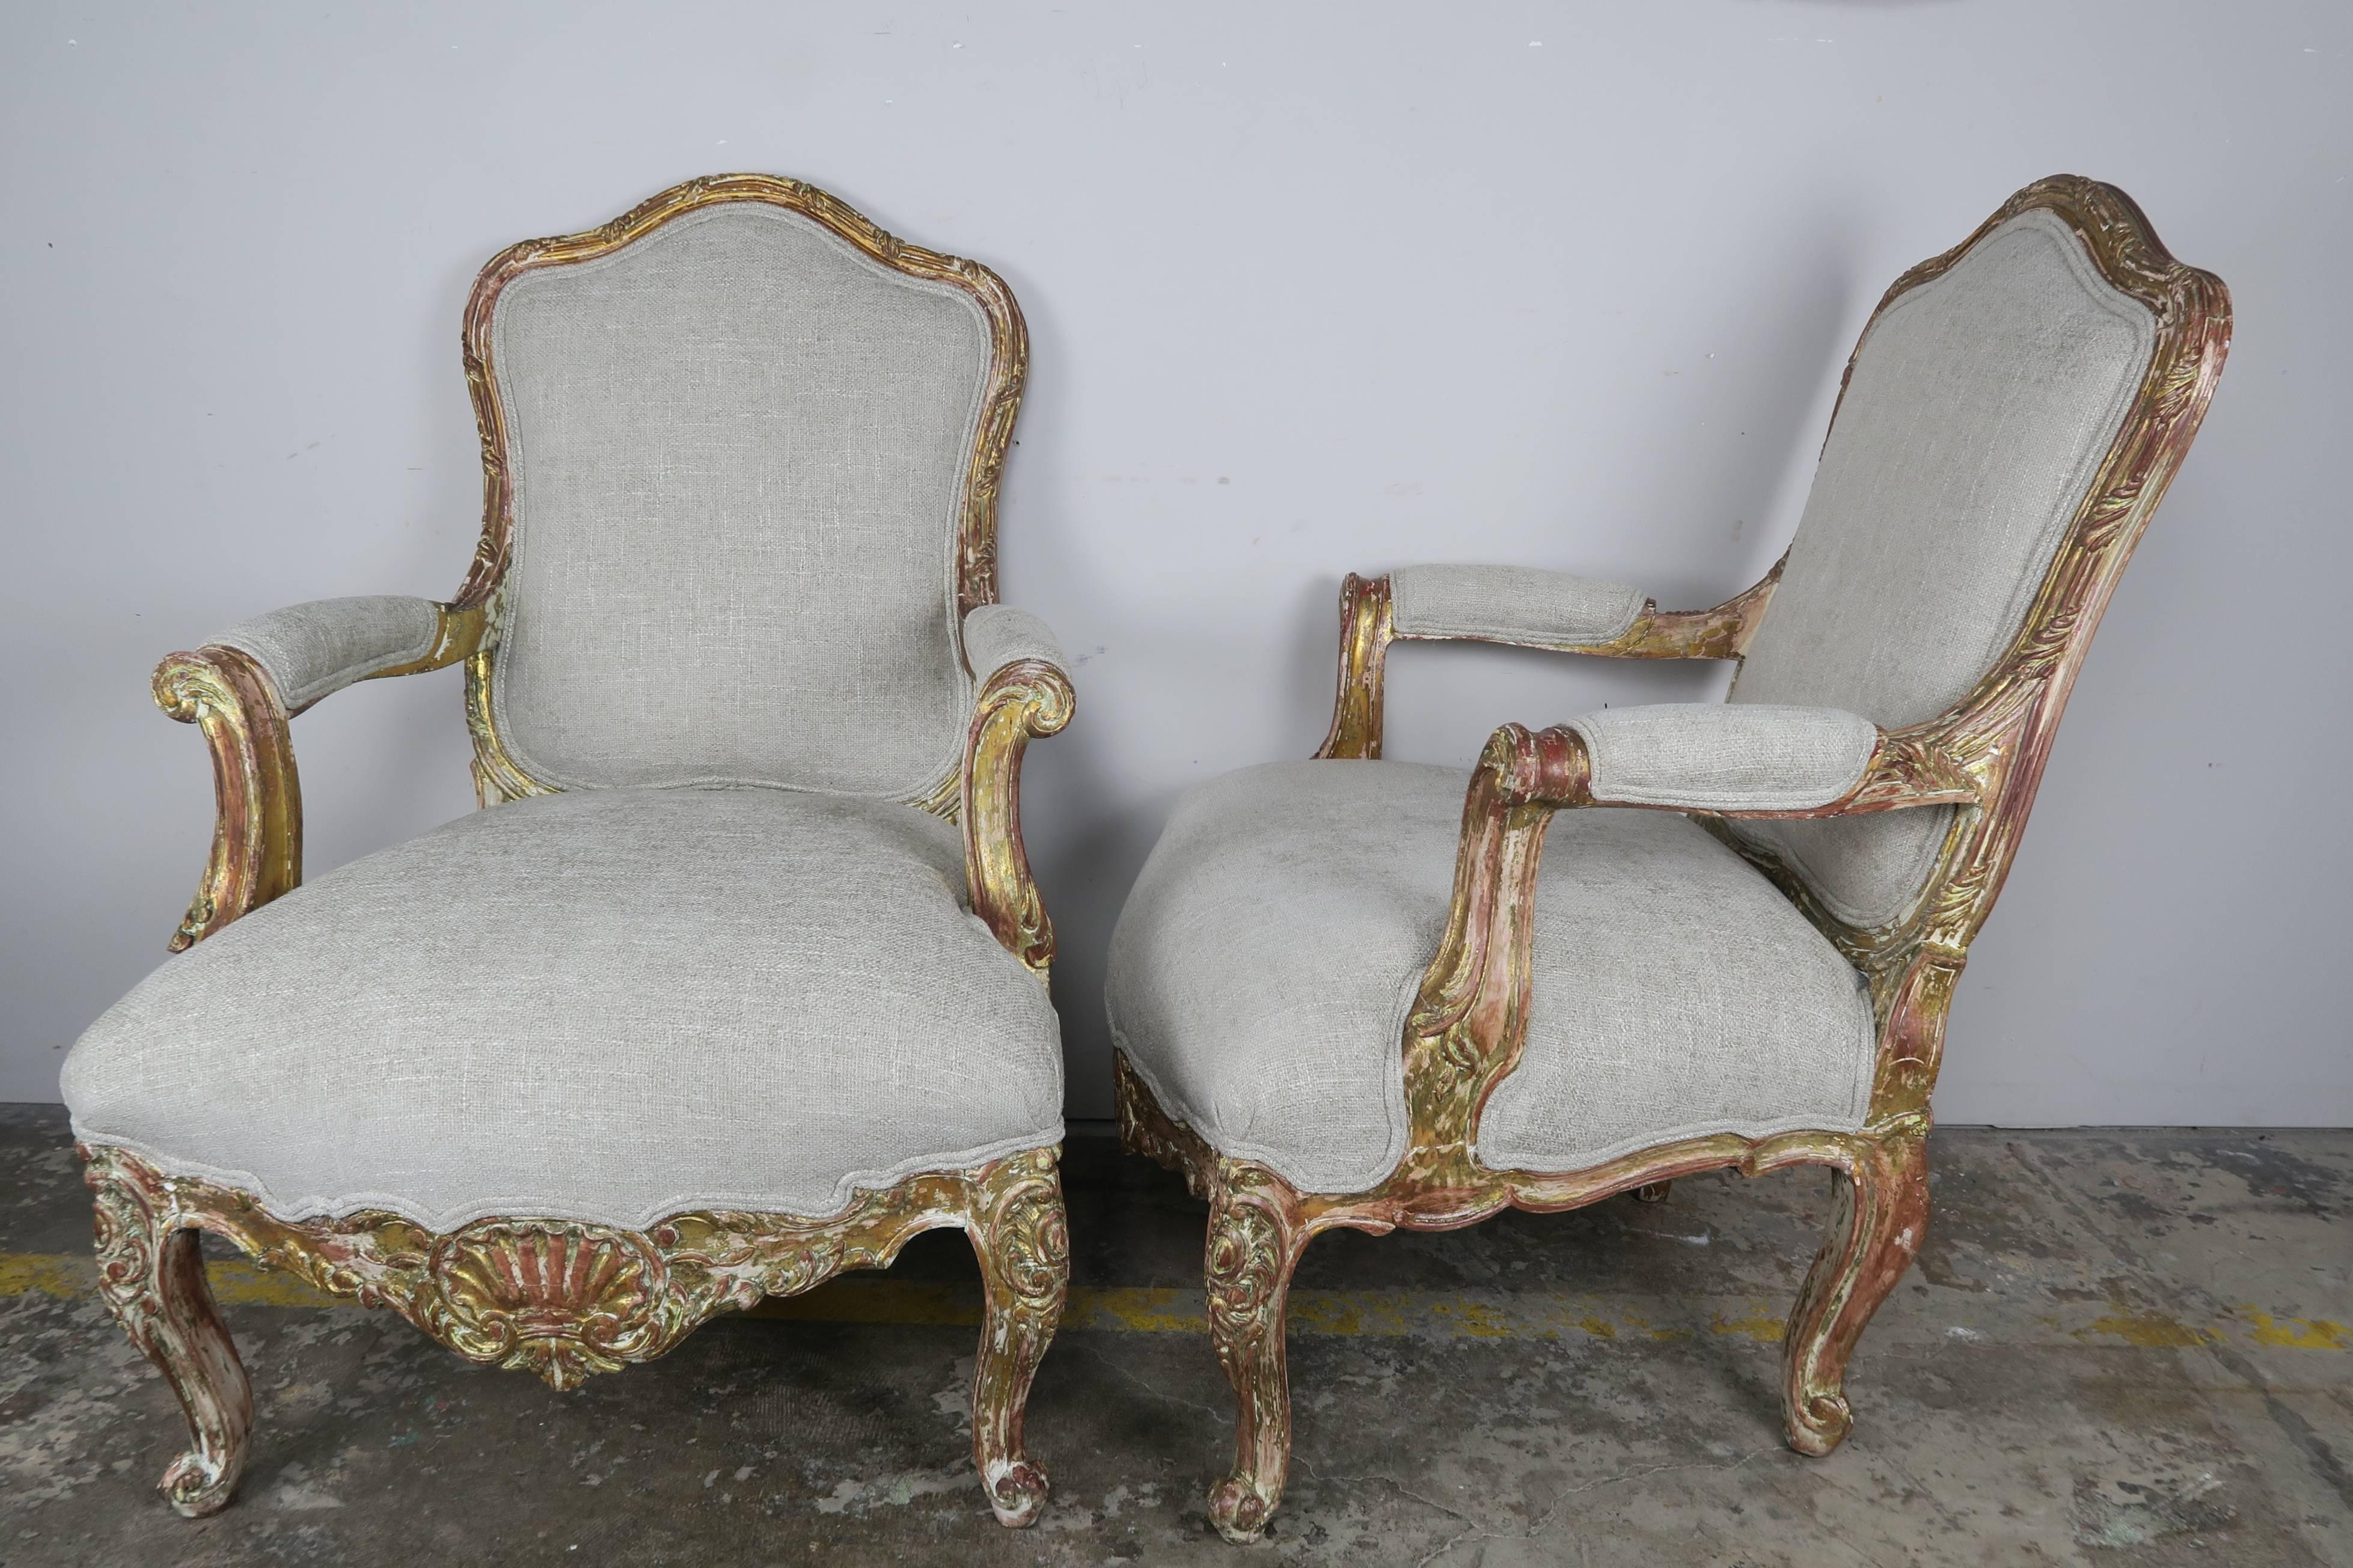 Pair of French carved giltwood Louis XV style armchairs standing on four cabriole legs with beautiful carved shell detail and rolled arms. Newly upholstered in a heavy textured linen with double self cord detail.